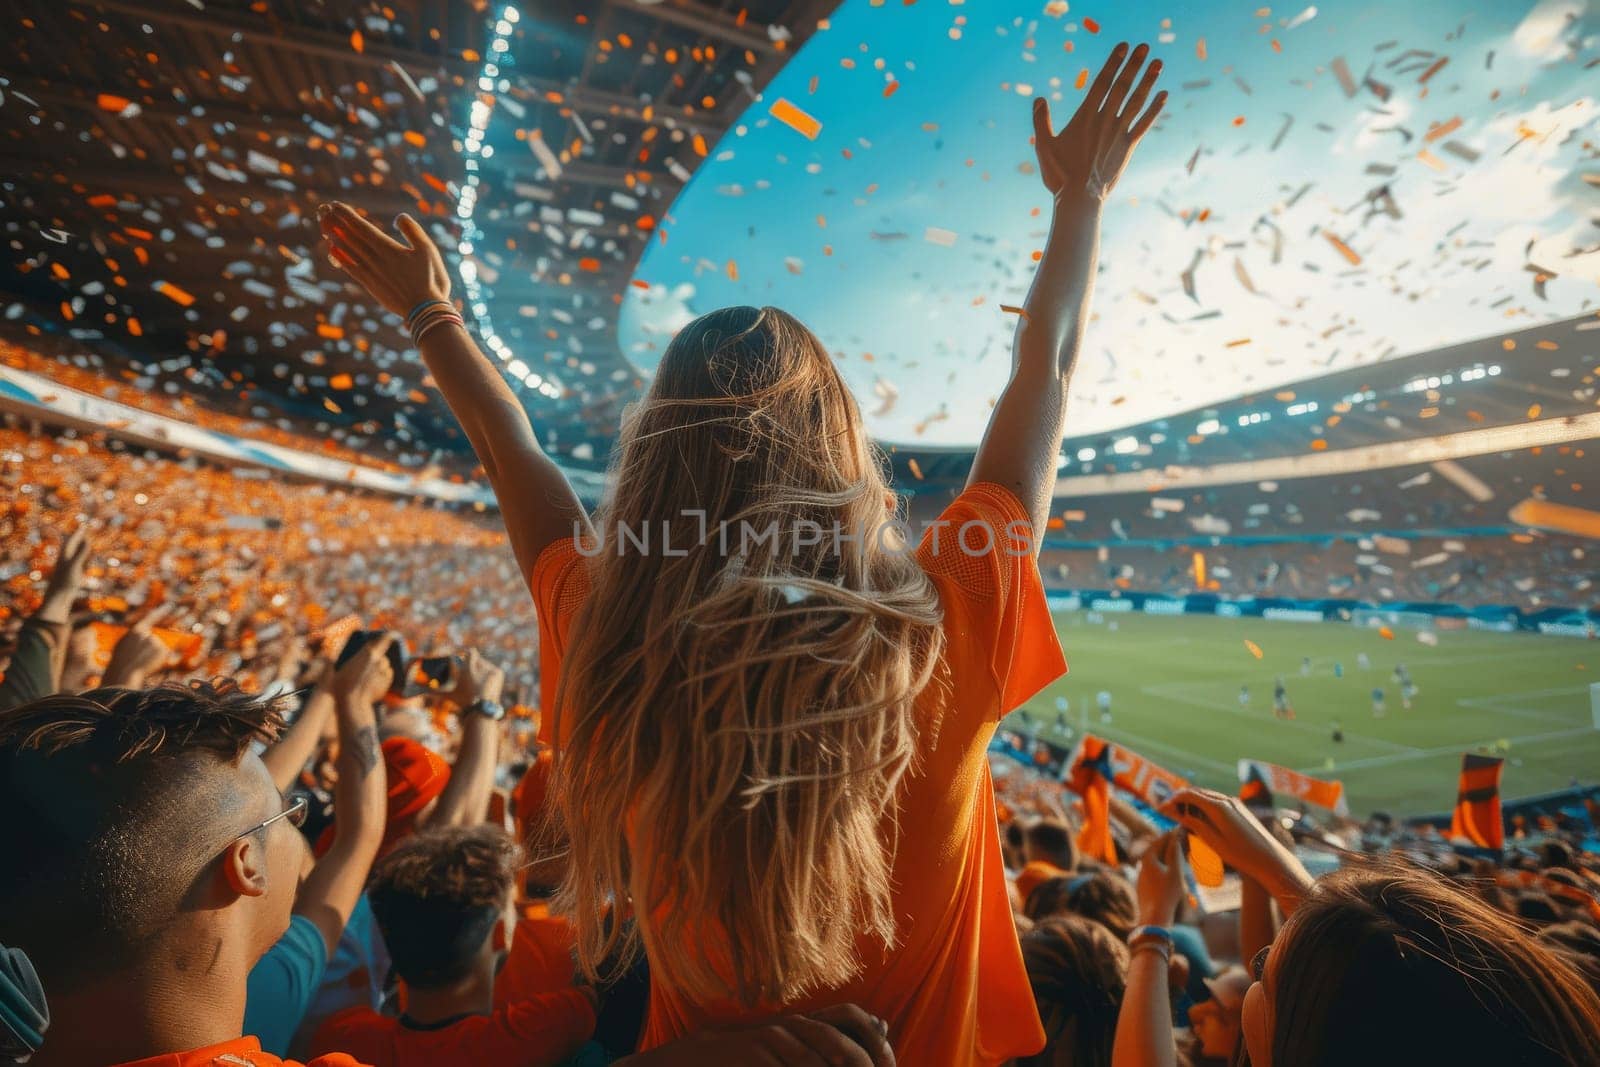 A woman is standing in a stadium with a crowd of people around her. She is holding her hands up in the air, and there are confetti falling around her. Scene is celebratory and joyful, as the woman